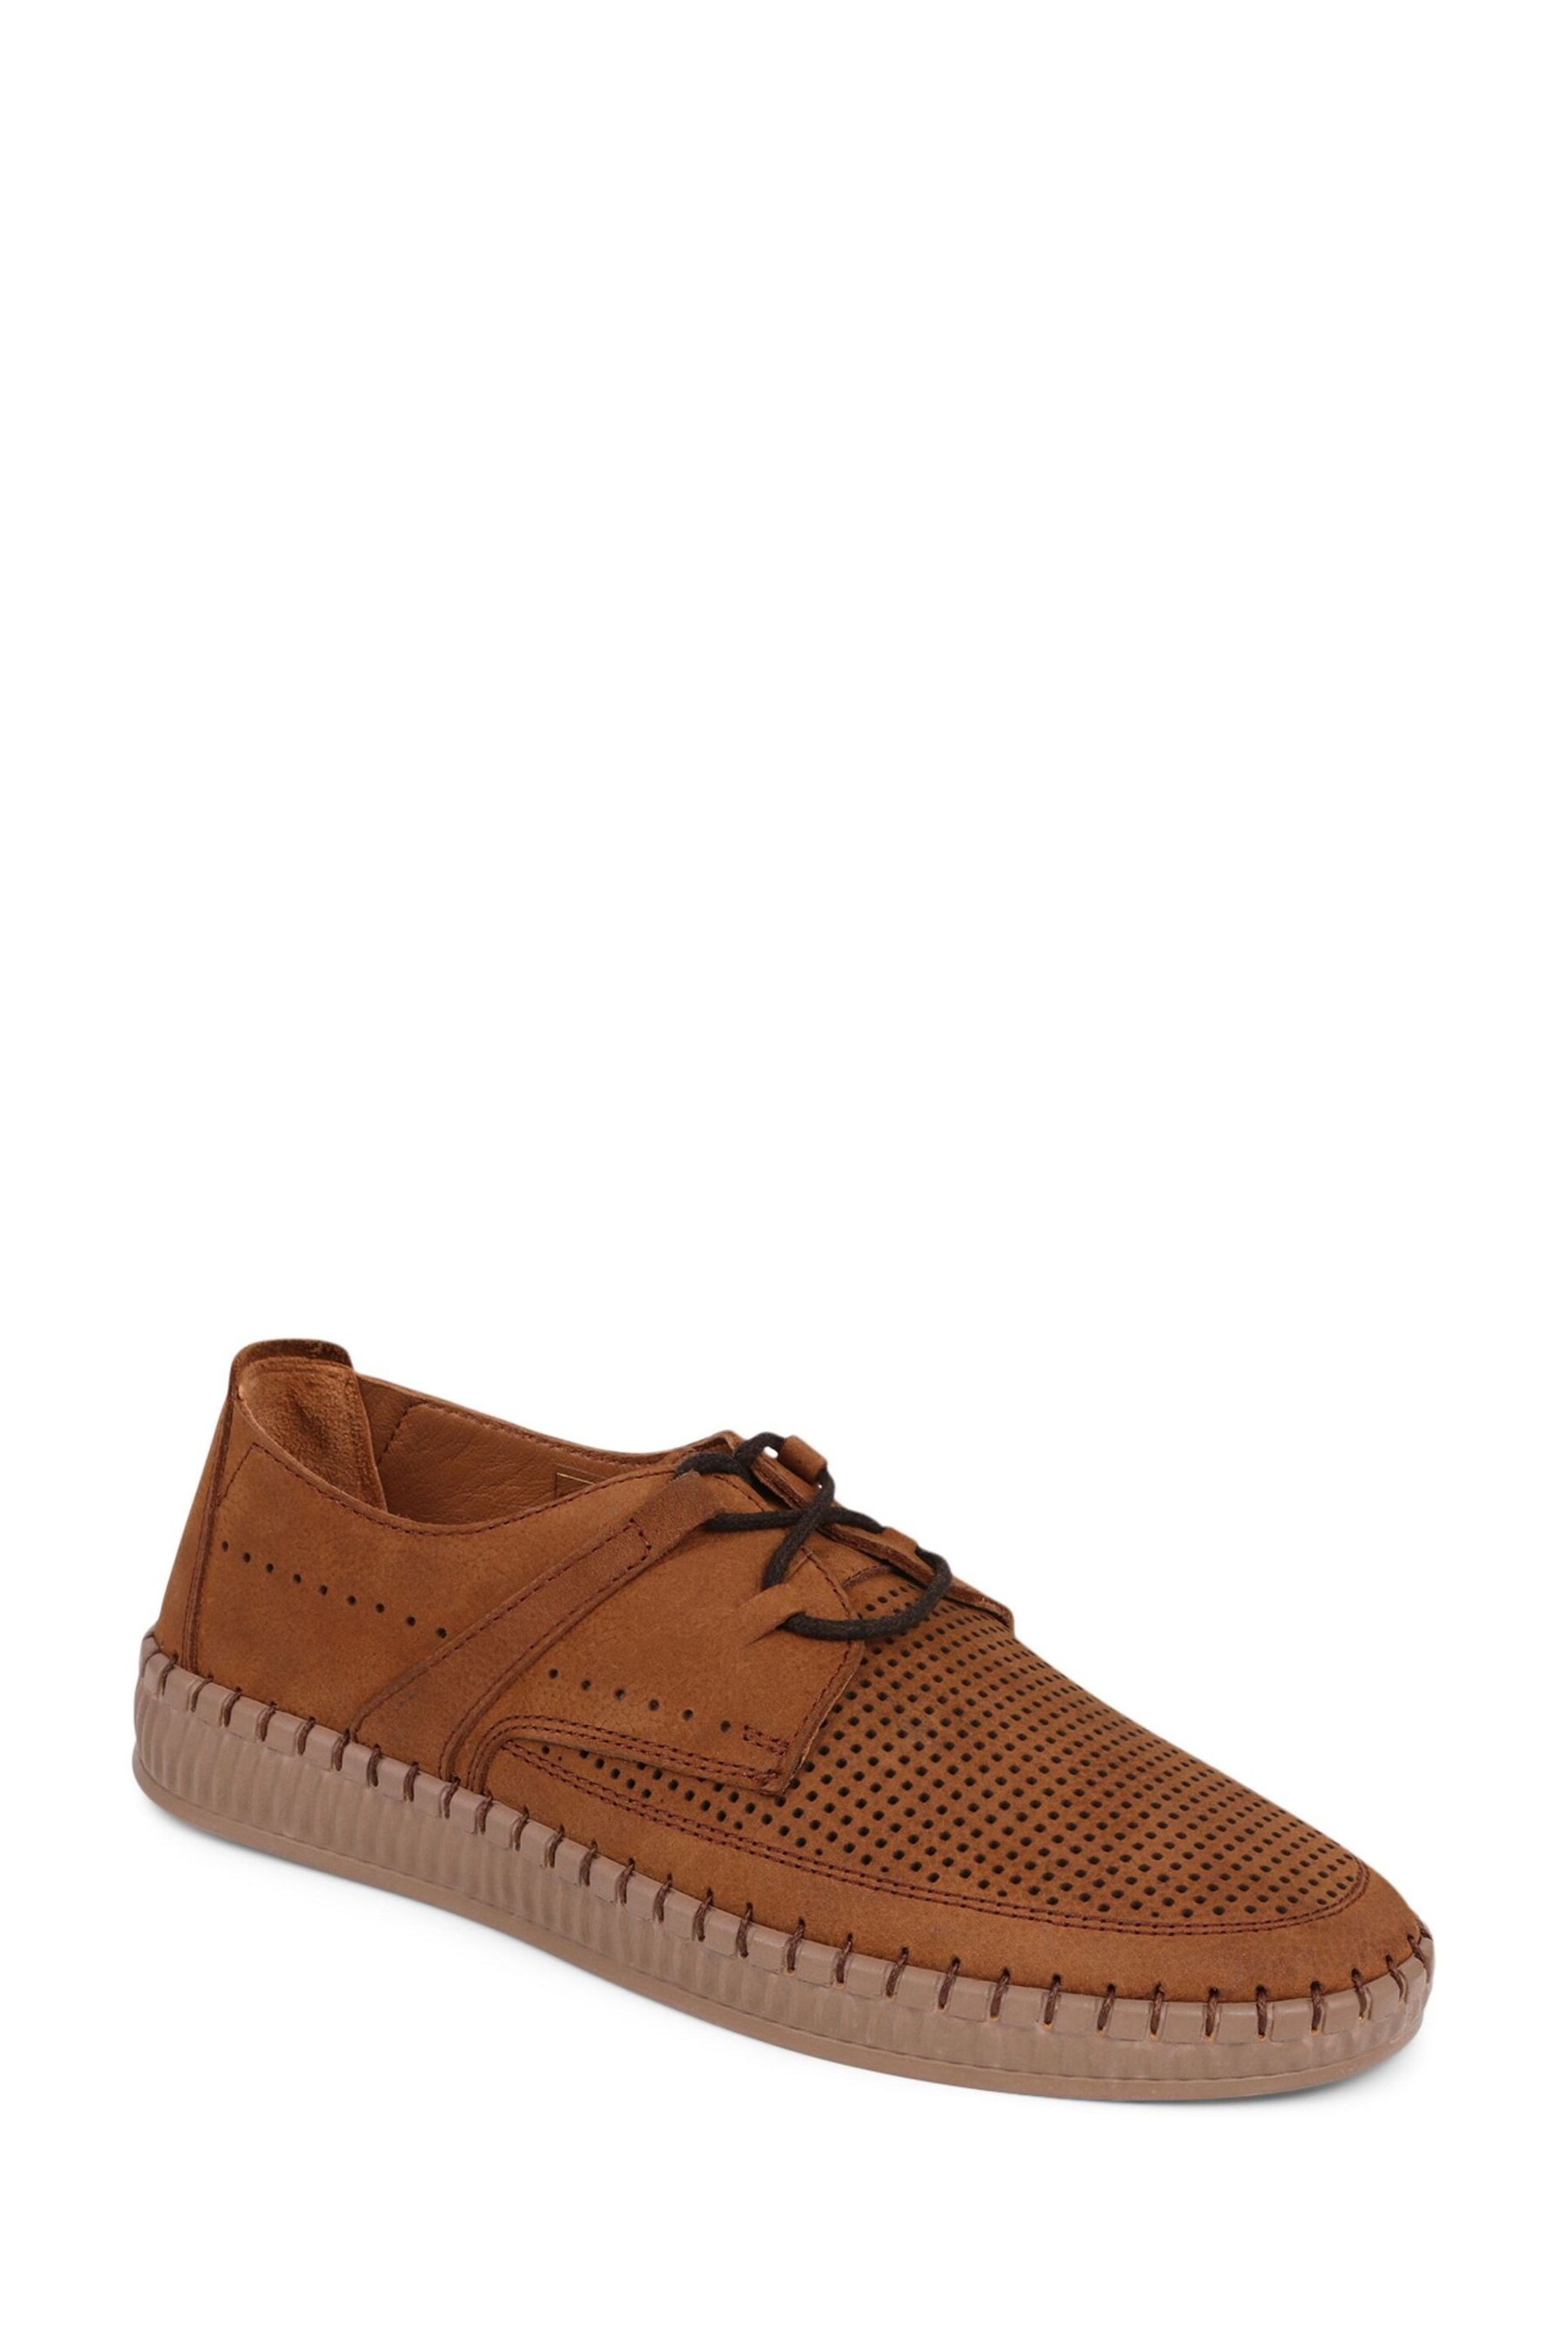 Pavers Lace-Up Leather Brown Shoes - Image 2 of 6